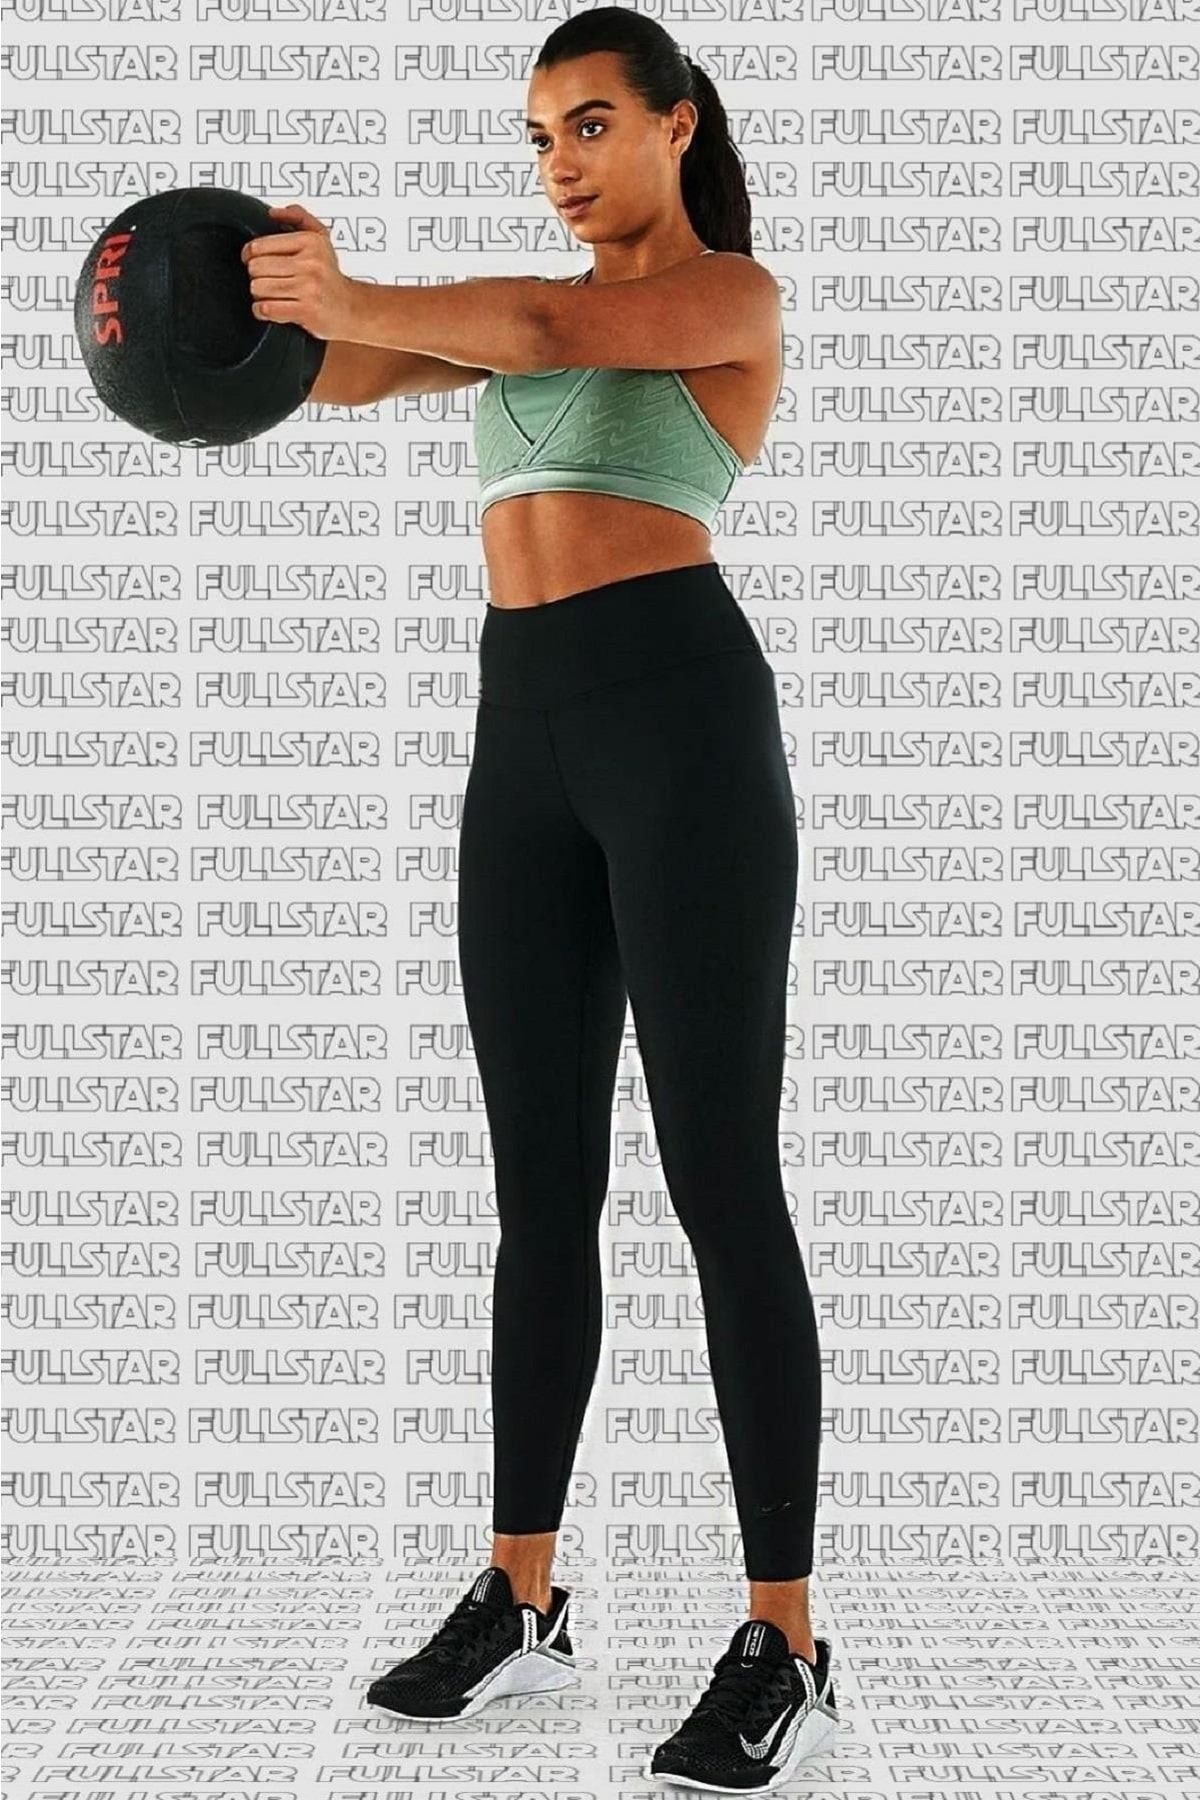 Nike Power Sculpt Hyper Tight Fit High Waisted Sculpting Black Sports Tights  - Trendyol